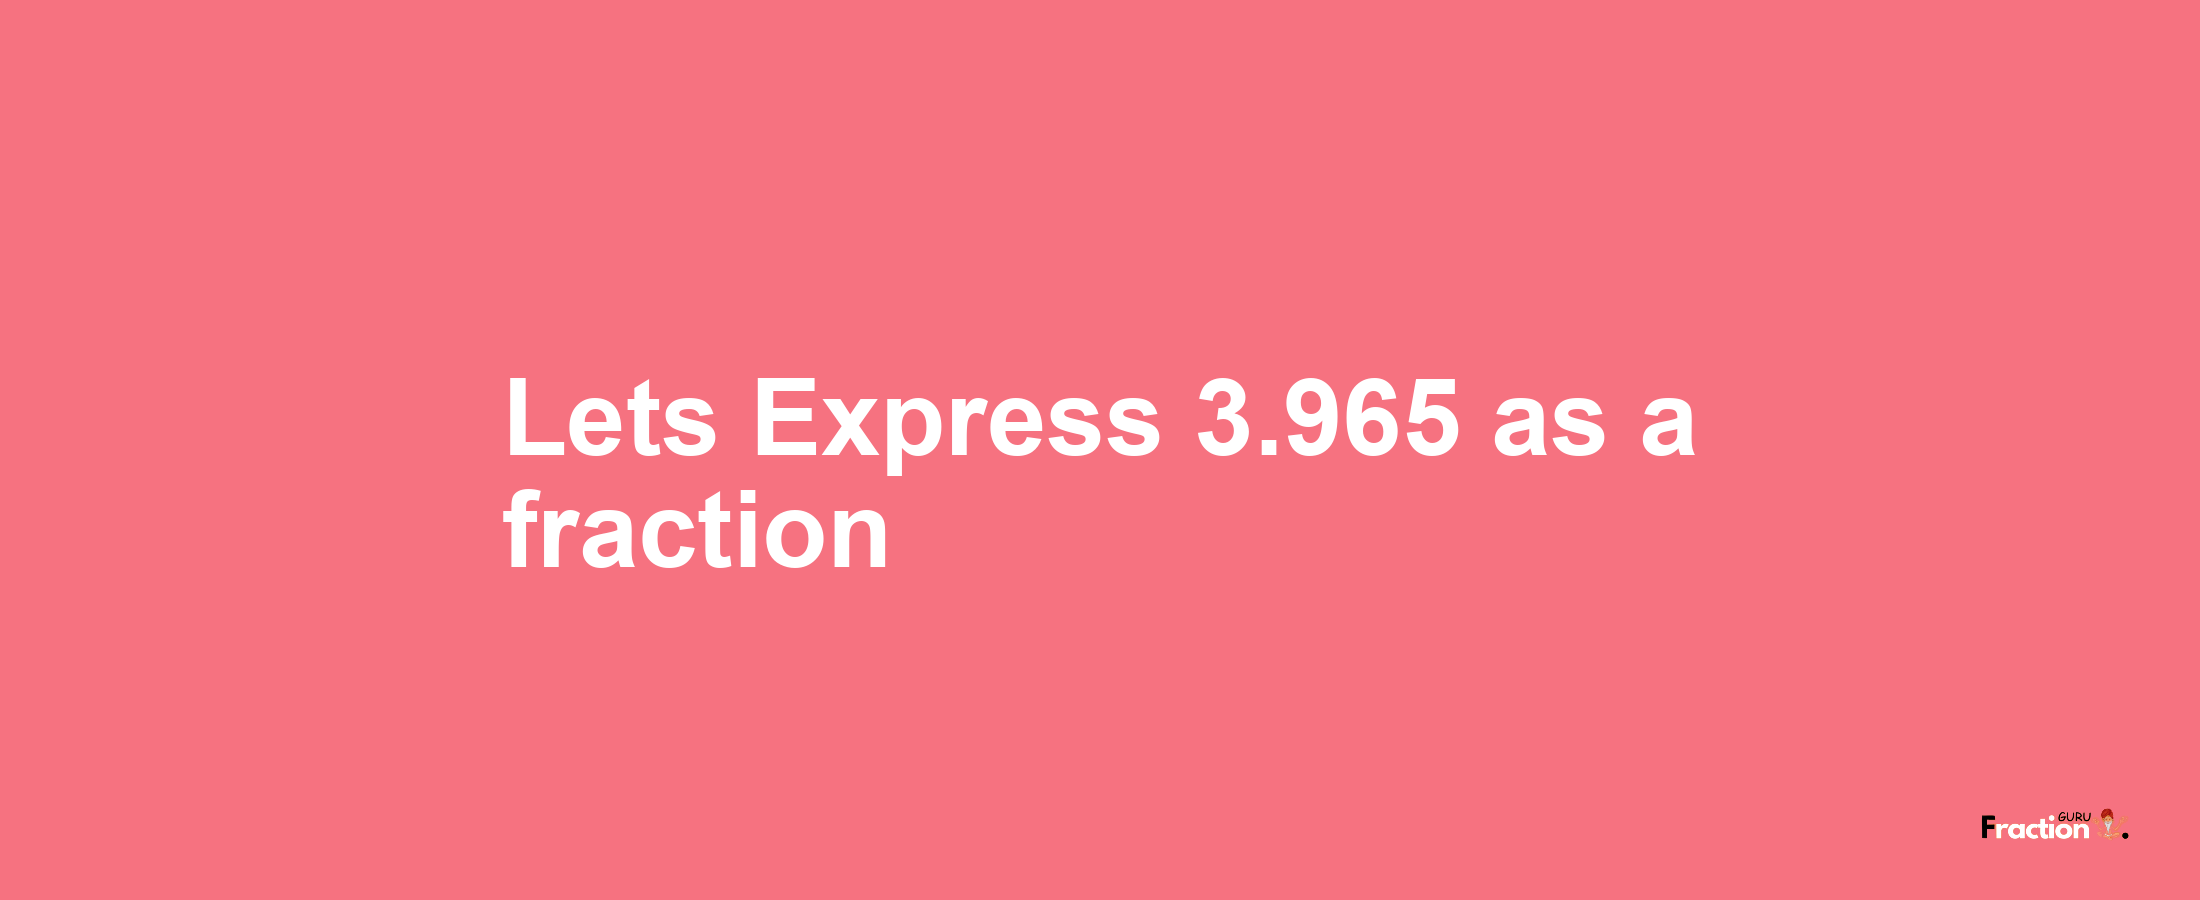 Lets Express 3.965 as afraction